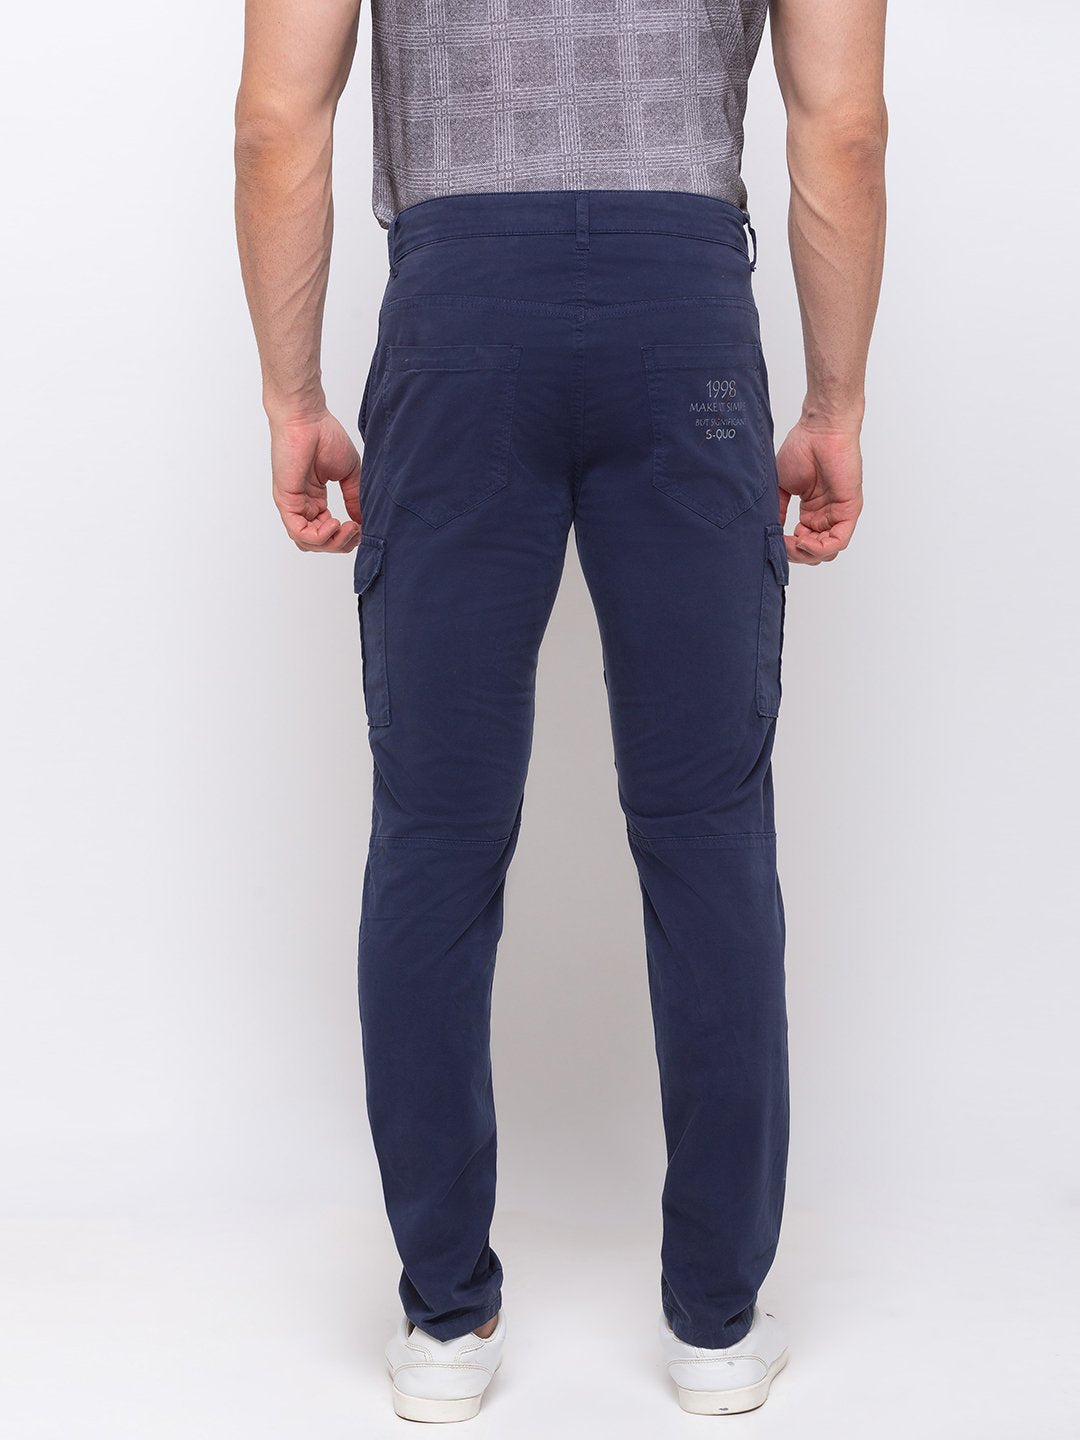 Topman relaxed cotton cargo pants in blue | ASOS